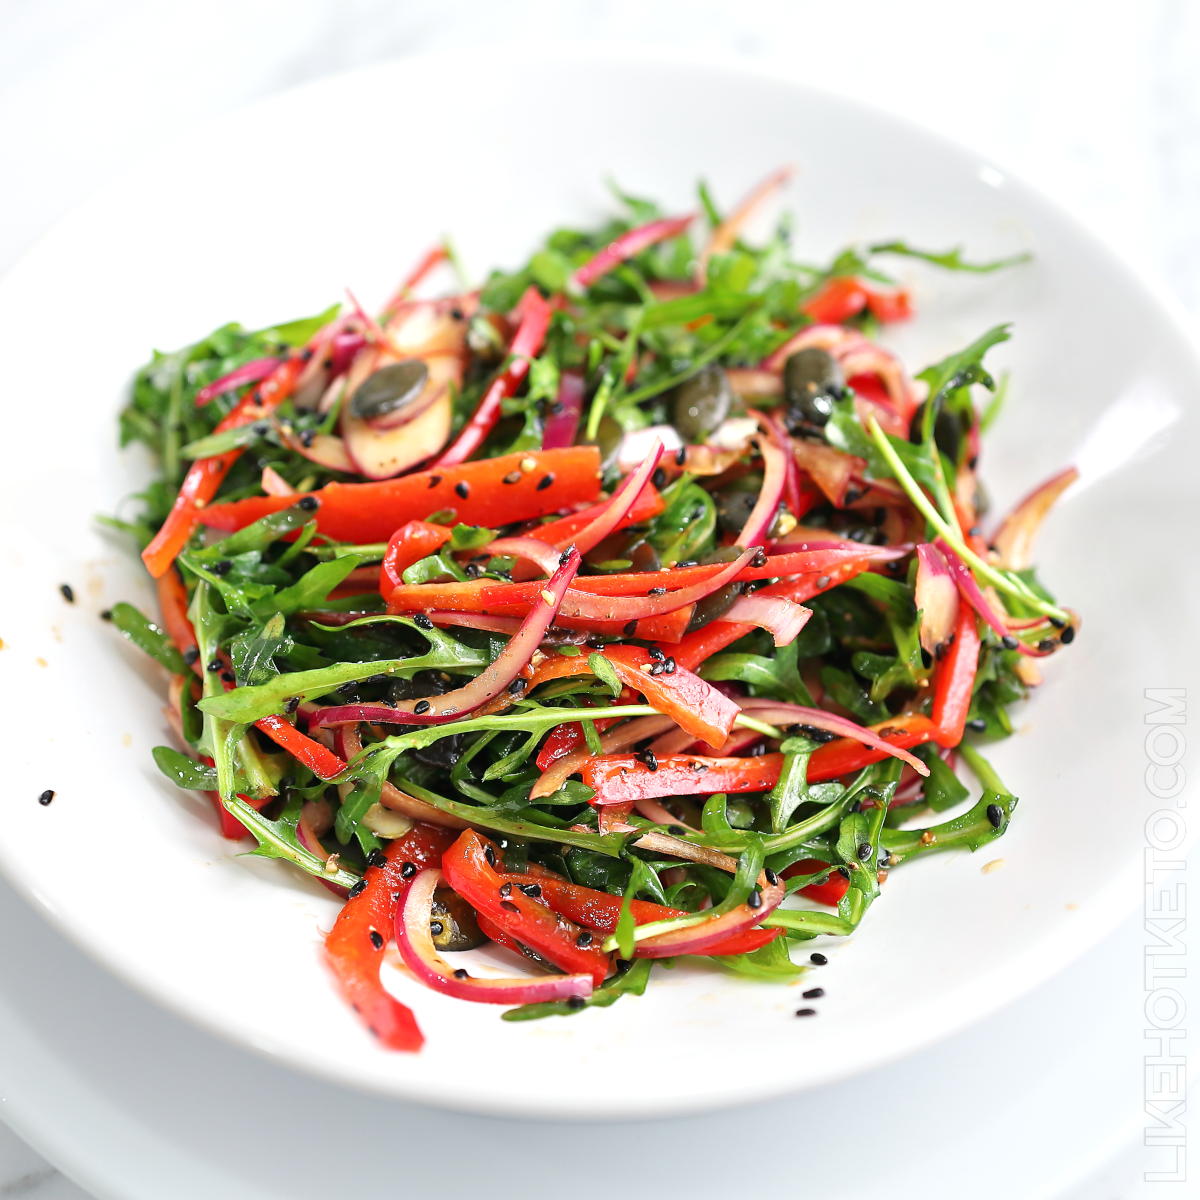 Colorful arugula salad with red onions and red peppers.